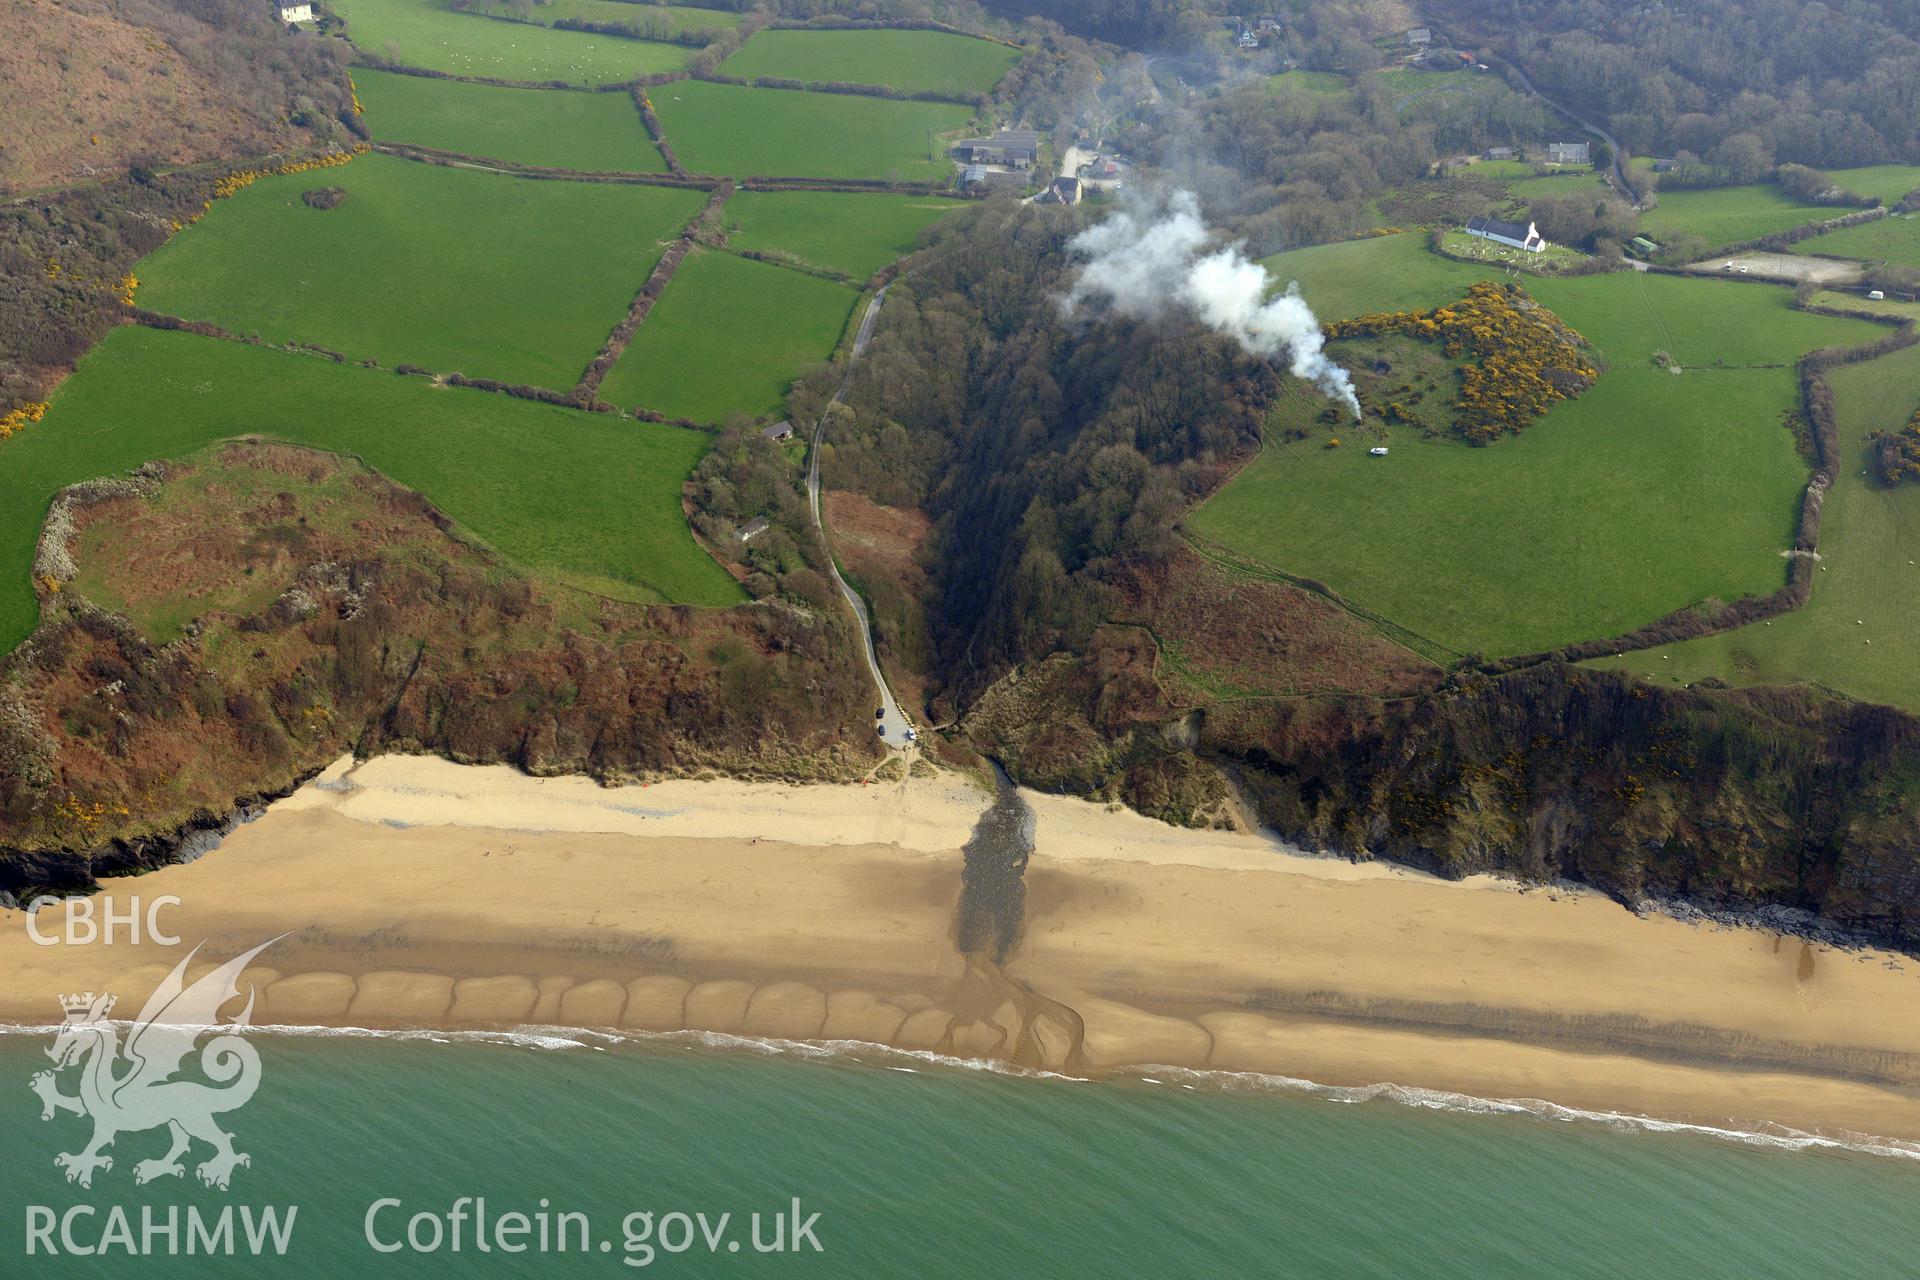 Royal Commission aerial photograph of Penbryn beach taken on 27th March 2017. Baseline aerial reconnaissance survey for the CHERISH Project. ? Crown: CHERISH PROJECT 2017. Produced with EU funds through the Ireland Wales Co-operation Programme 2014-2020. All material made freely available through the Open Government Licence.